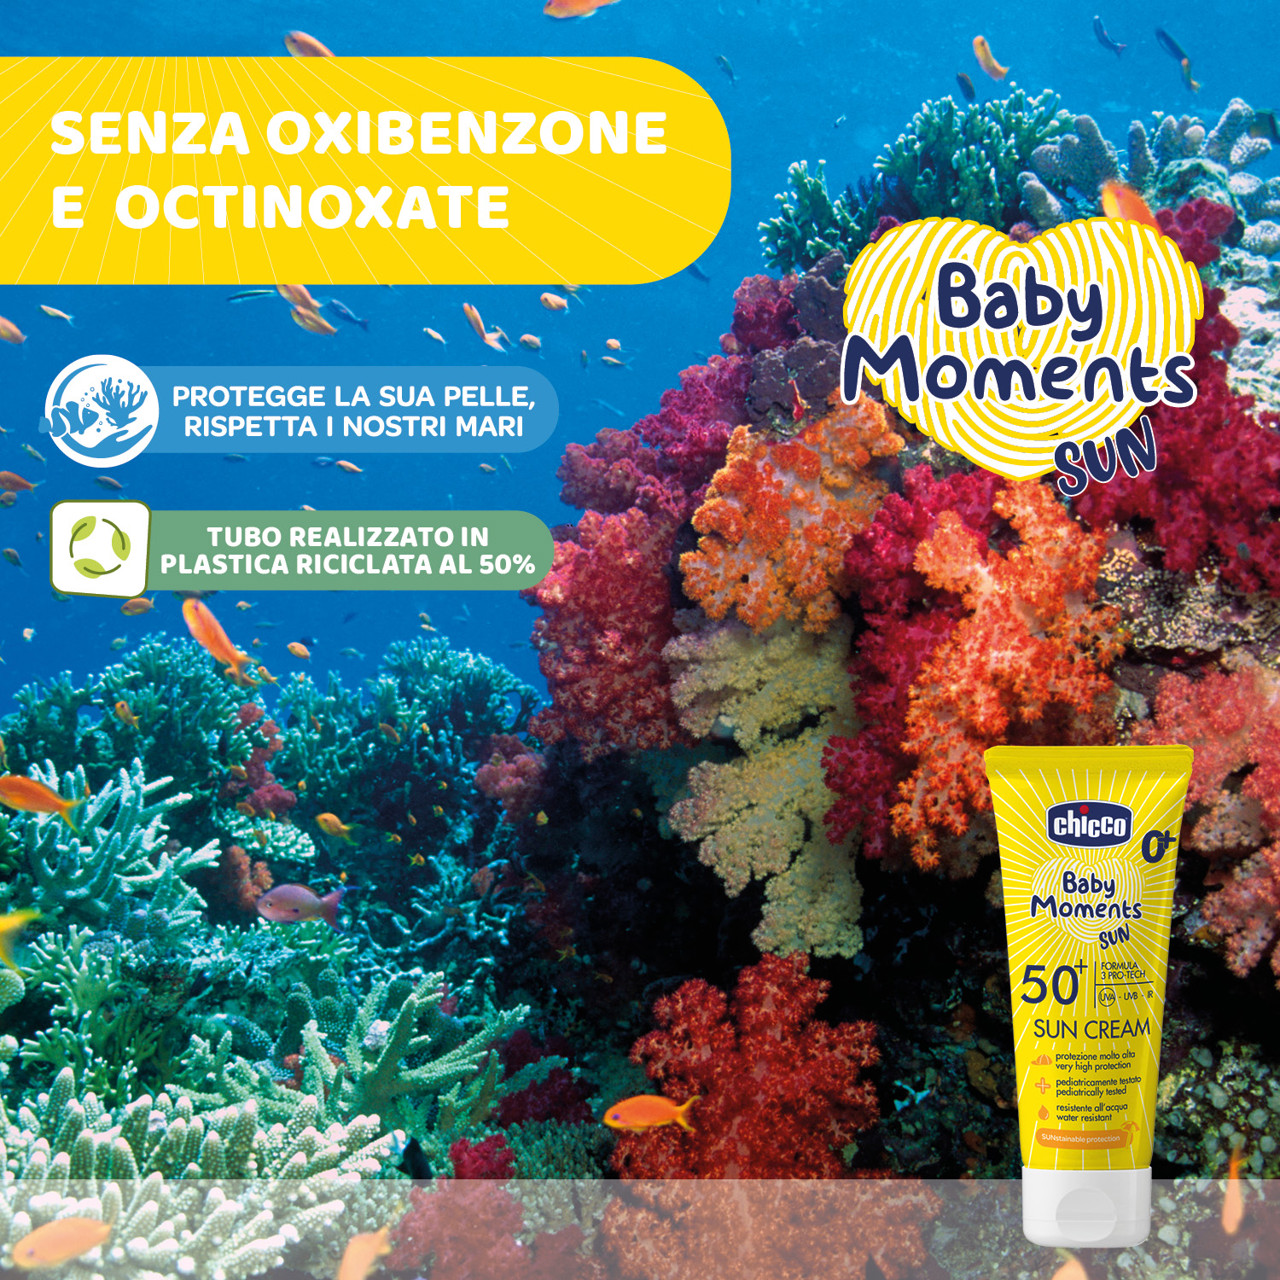 Baby Moments SUN - Crema solare SPF 50+ 75 ml. image number 2